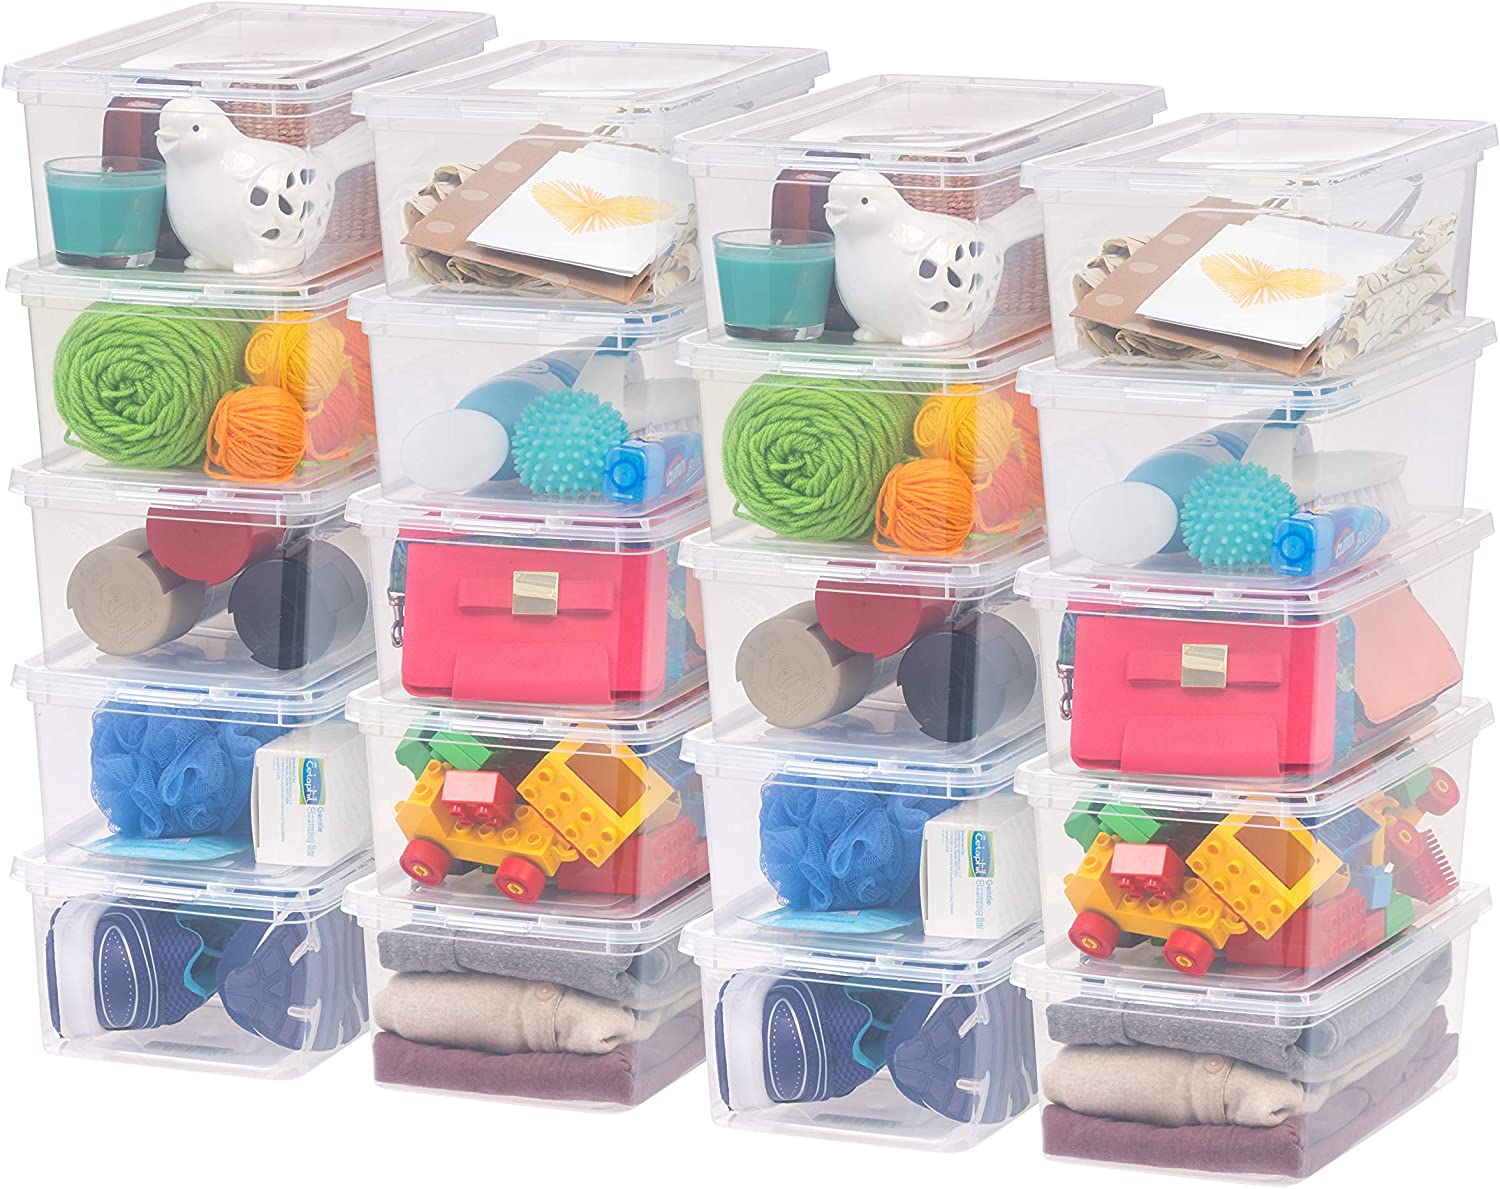 How to Organise Your Storage Boxes